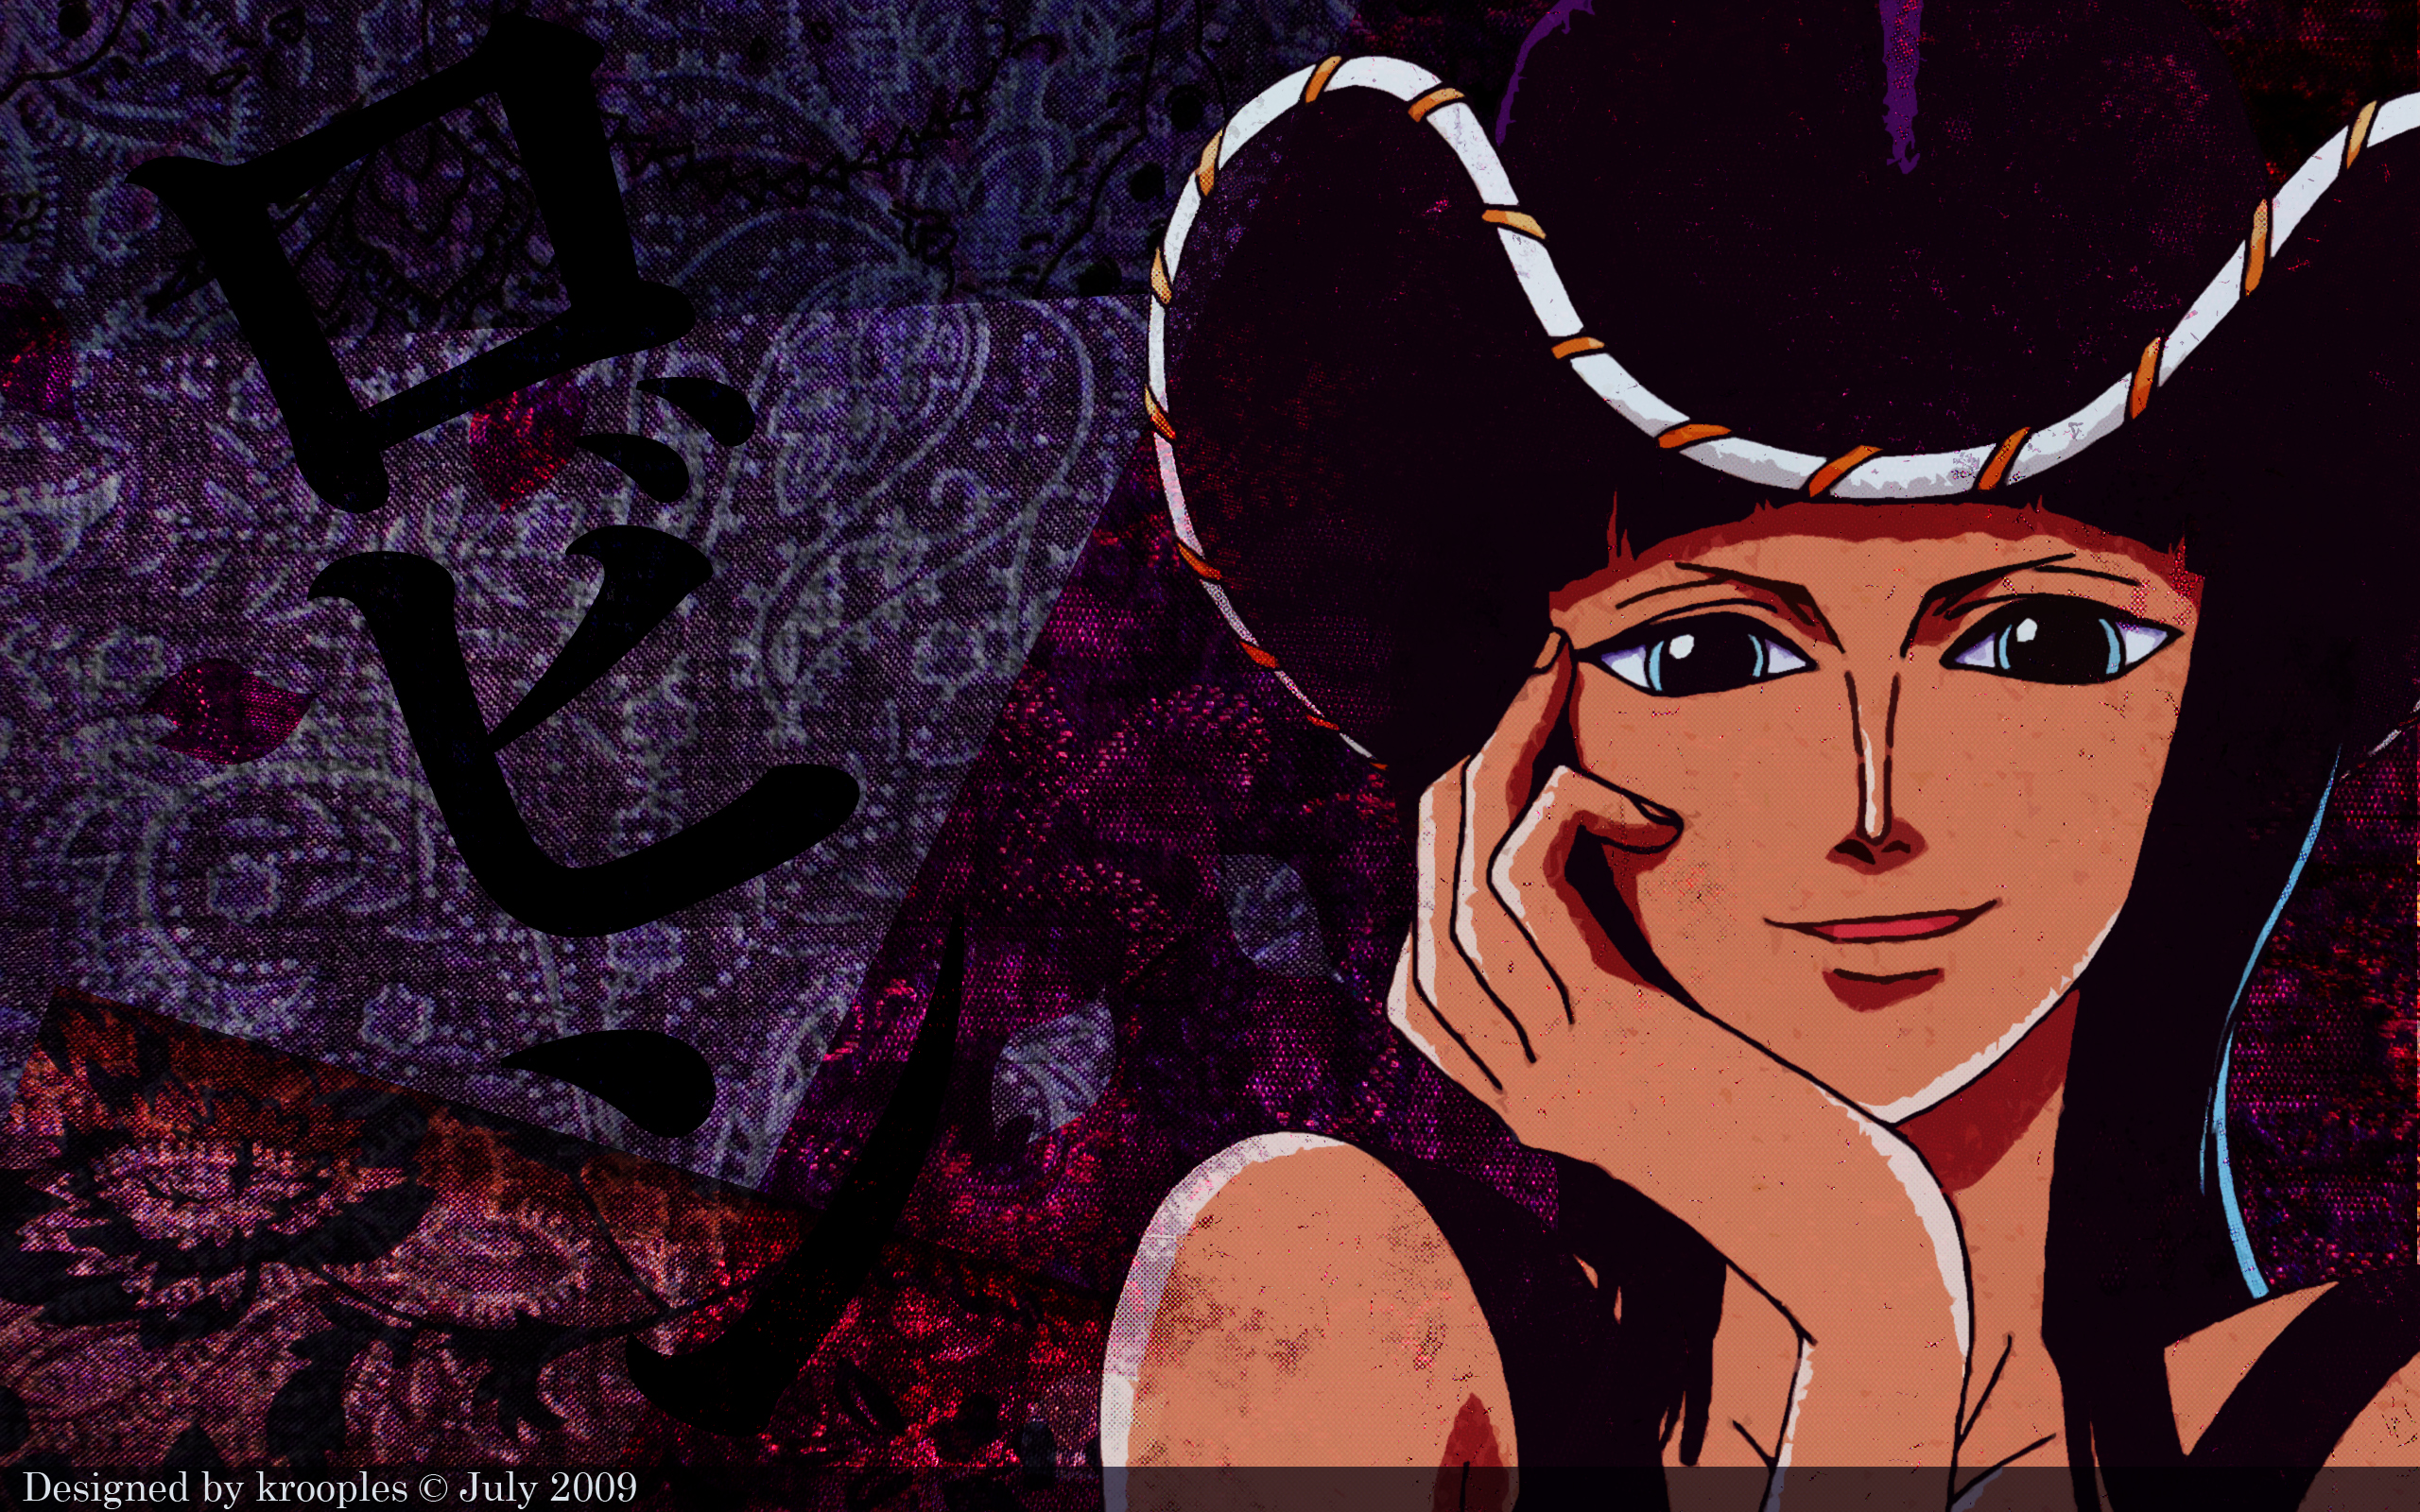 230+ Nico Robin HD Wallpapers and Backgrounds